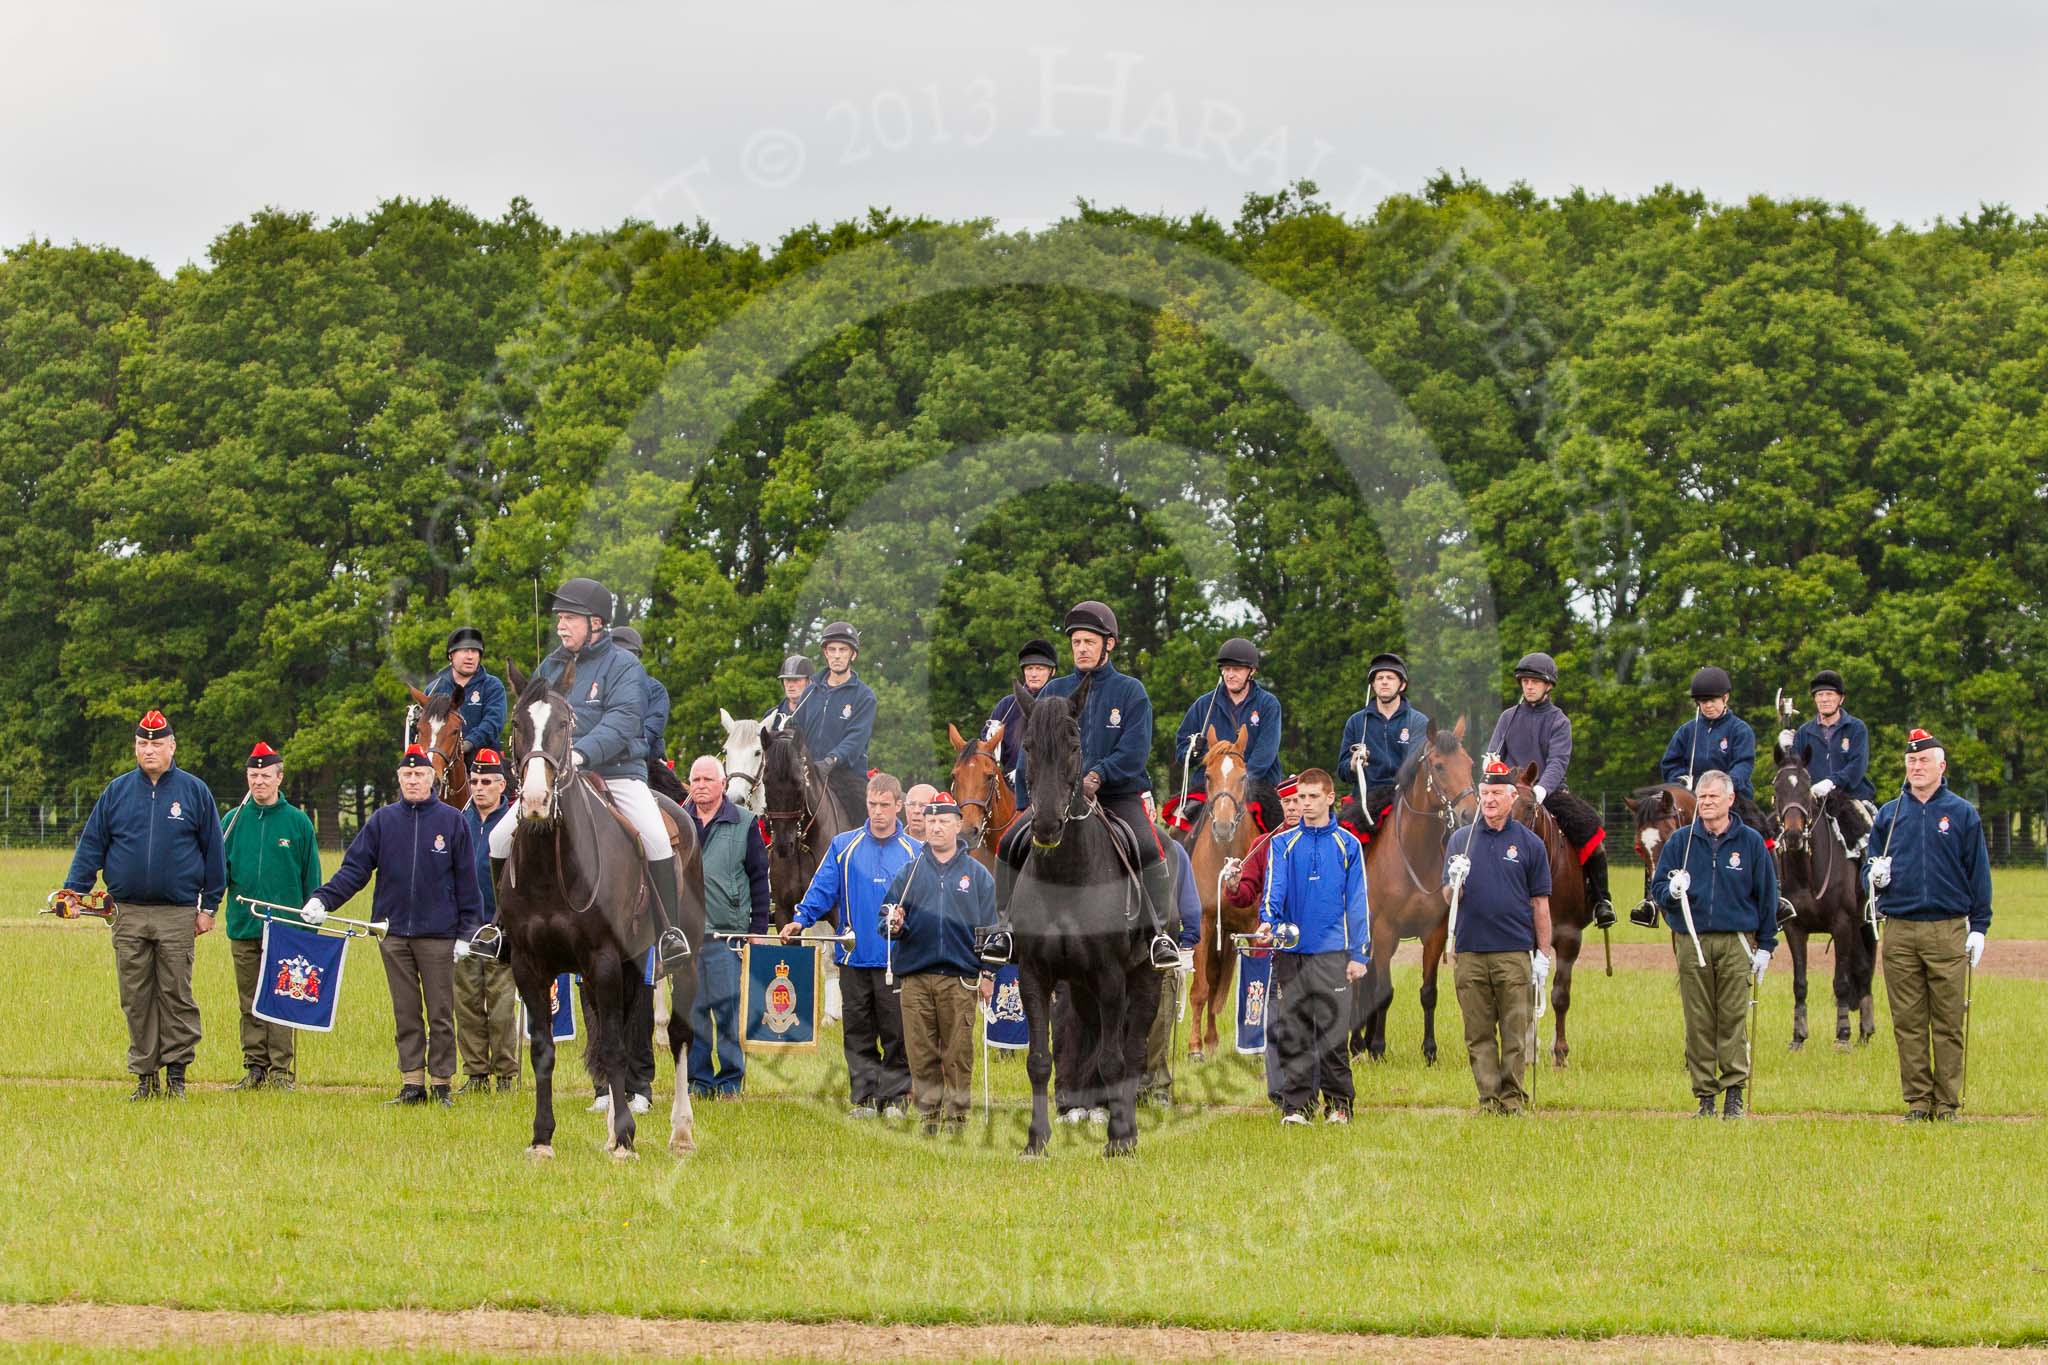 The Light Cavalry HAC Annual Review and Inspection 2013.
Windsor Great Park Review Ground,
Windsor,
Berkshire,
United Kingdom,
on 09 June 2013 at 10:54, image #109